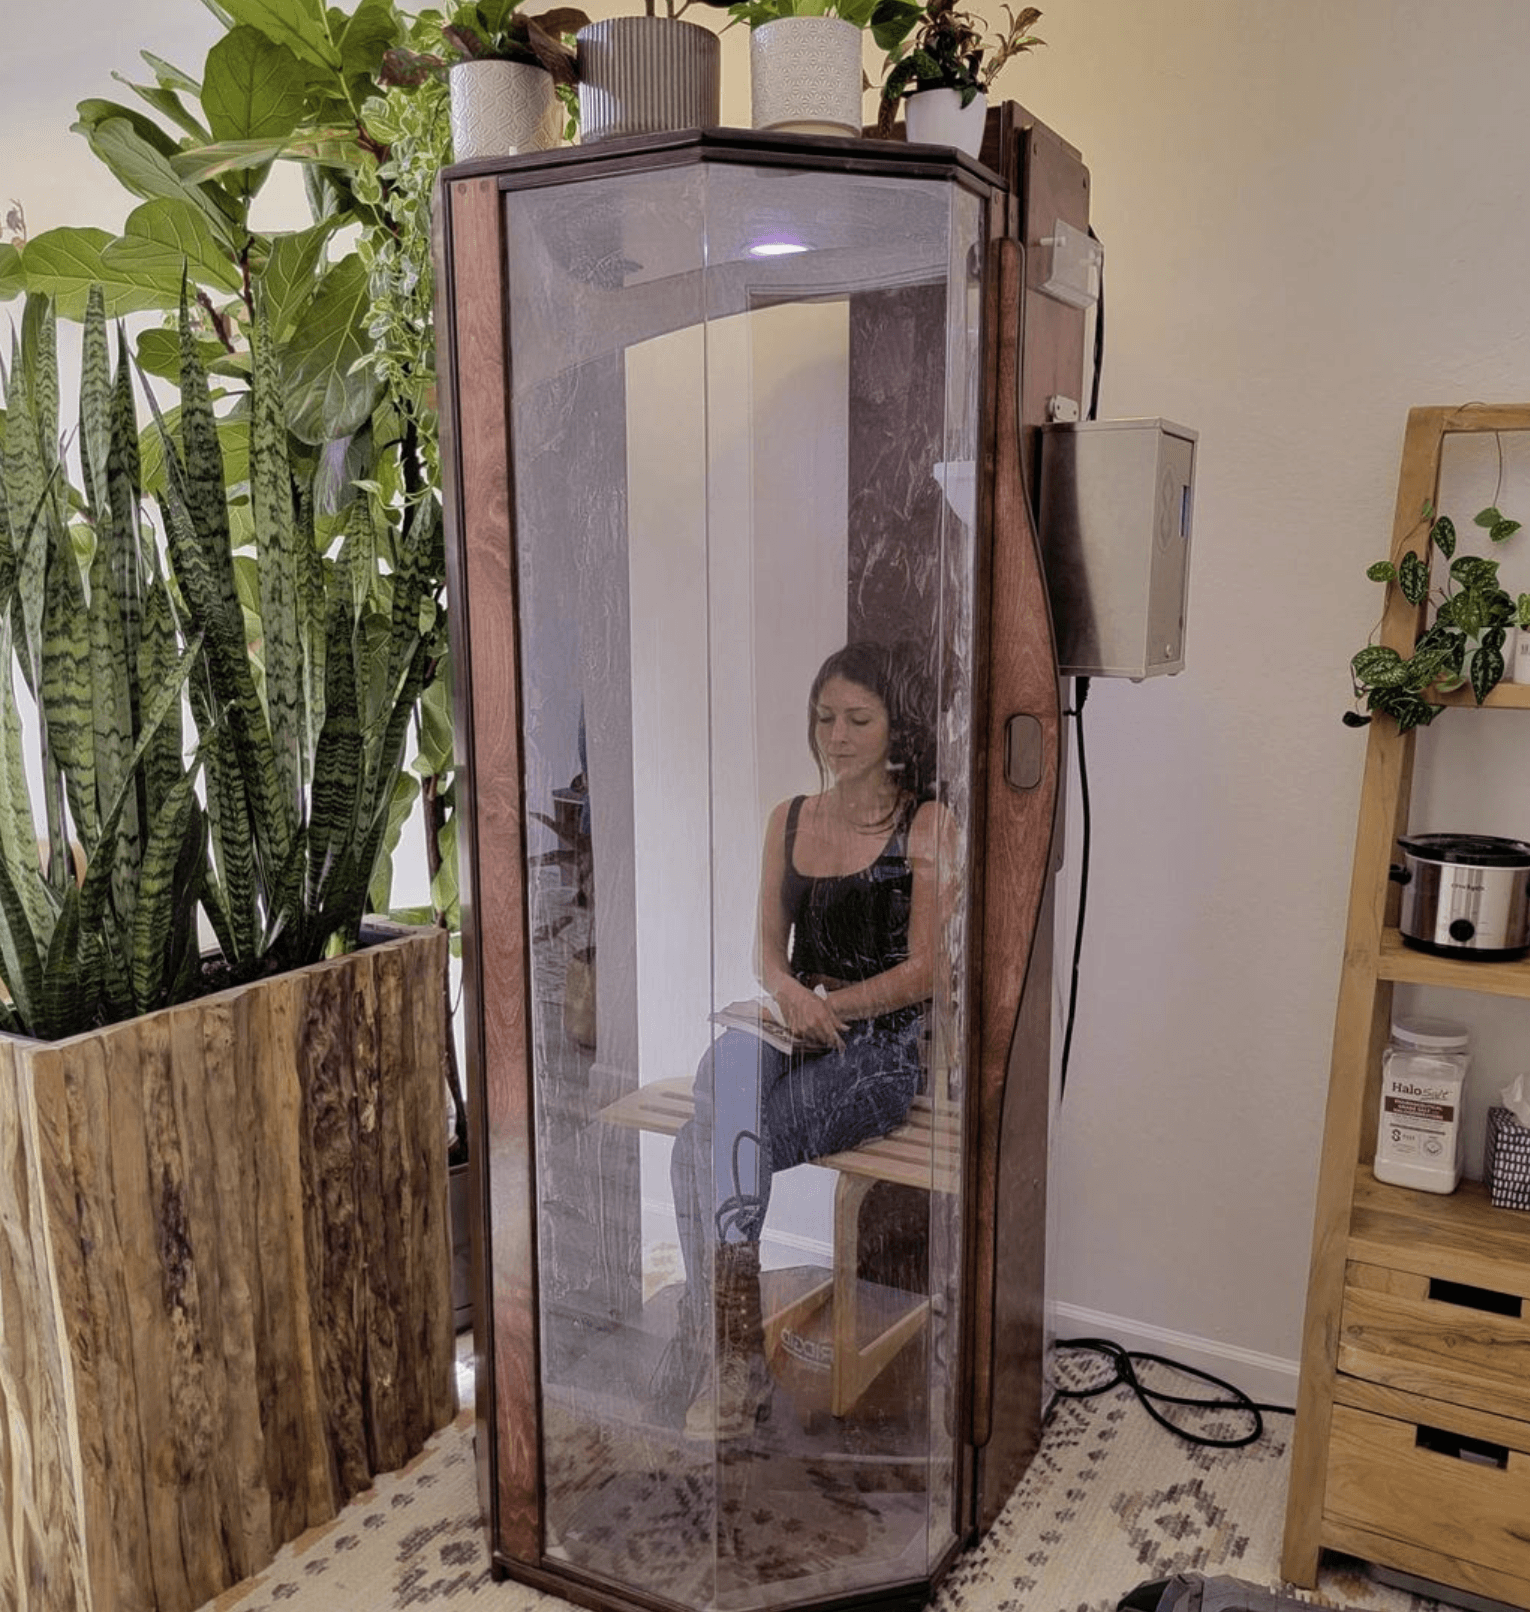 A woman in an Original SALT Booth for salt therapy at Bay Area Brain Spa in Albany, California.